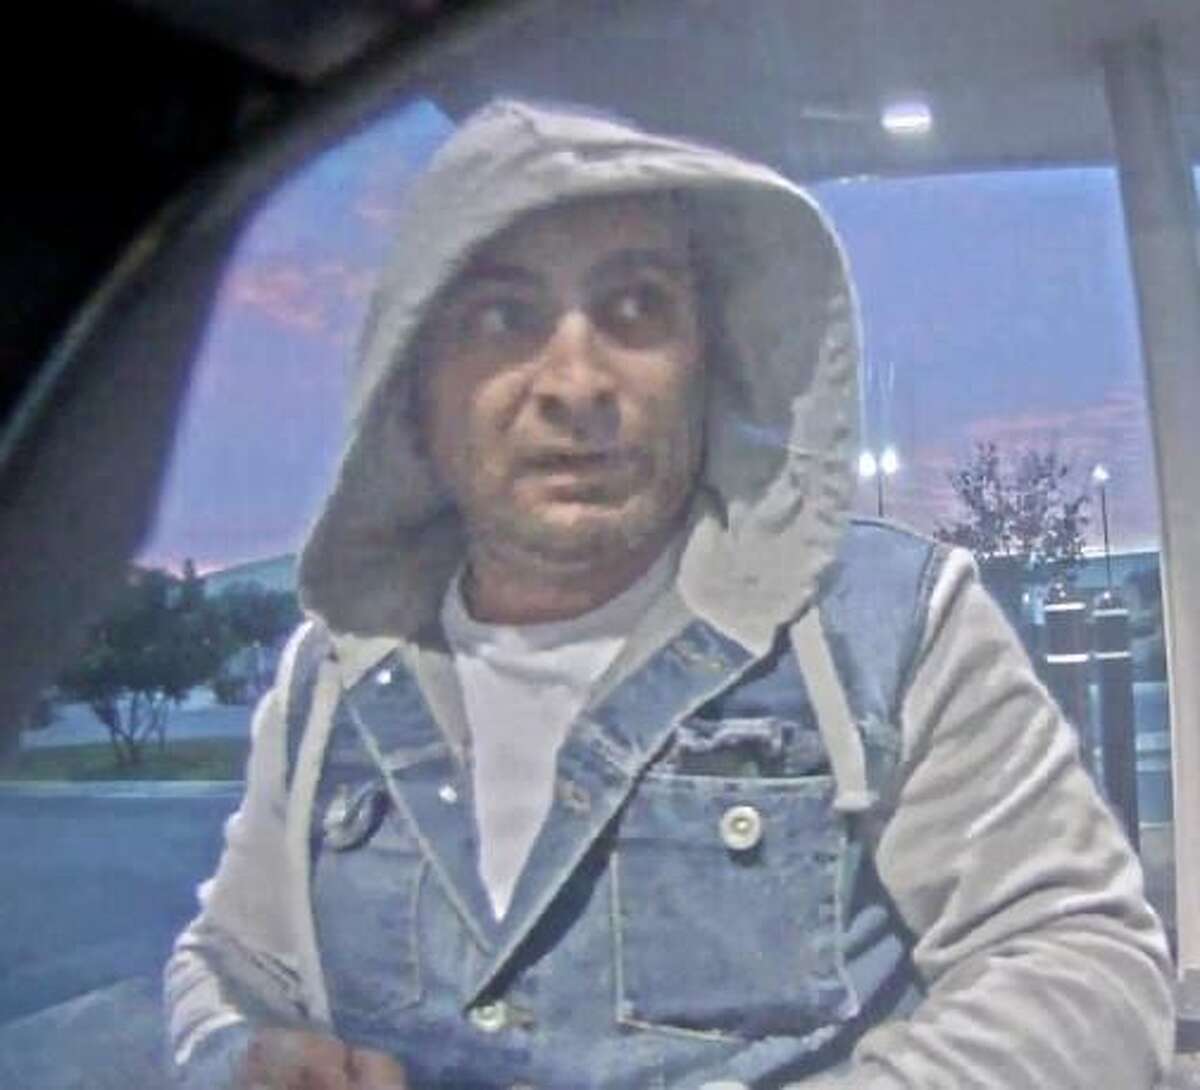 An image released by San Antonio Police Department detectives shows one of two men suspected of placing a card skimmer over an ATM on Friday near Blanco Road and Loop 410.